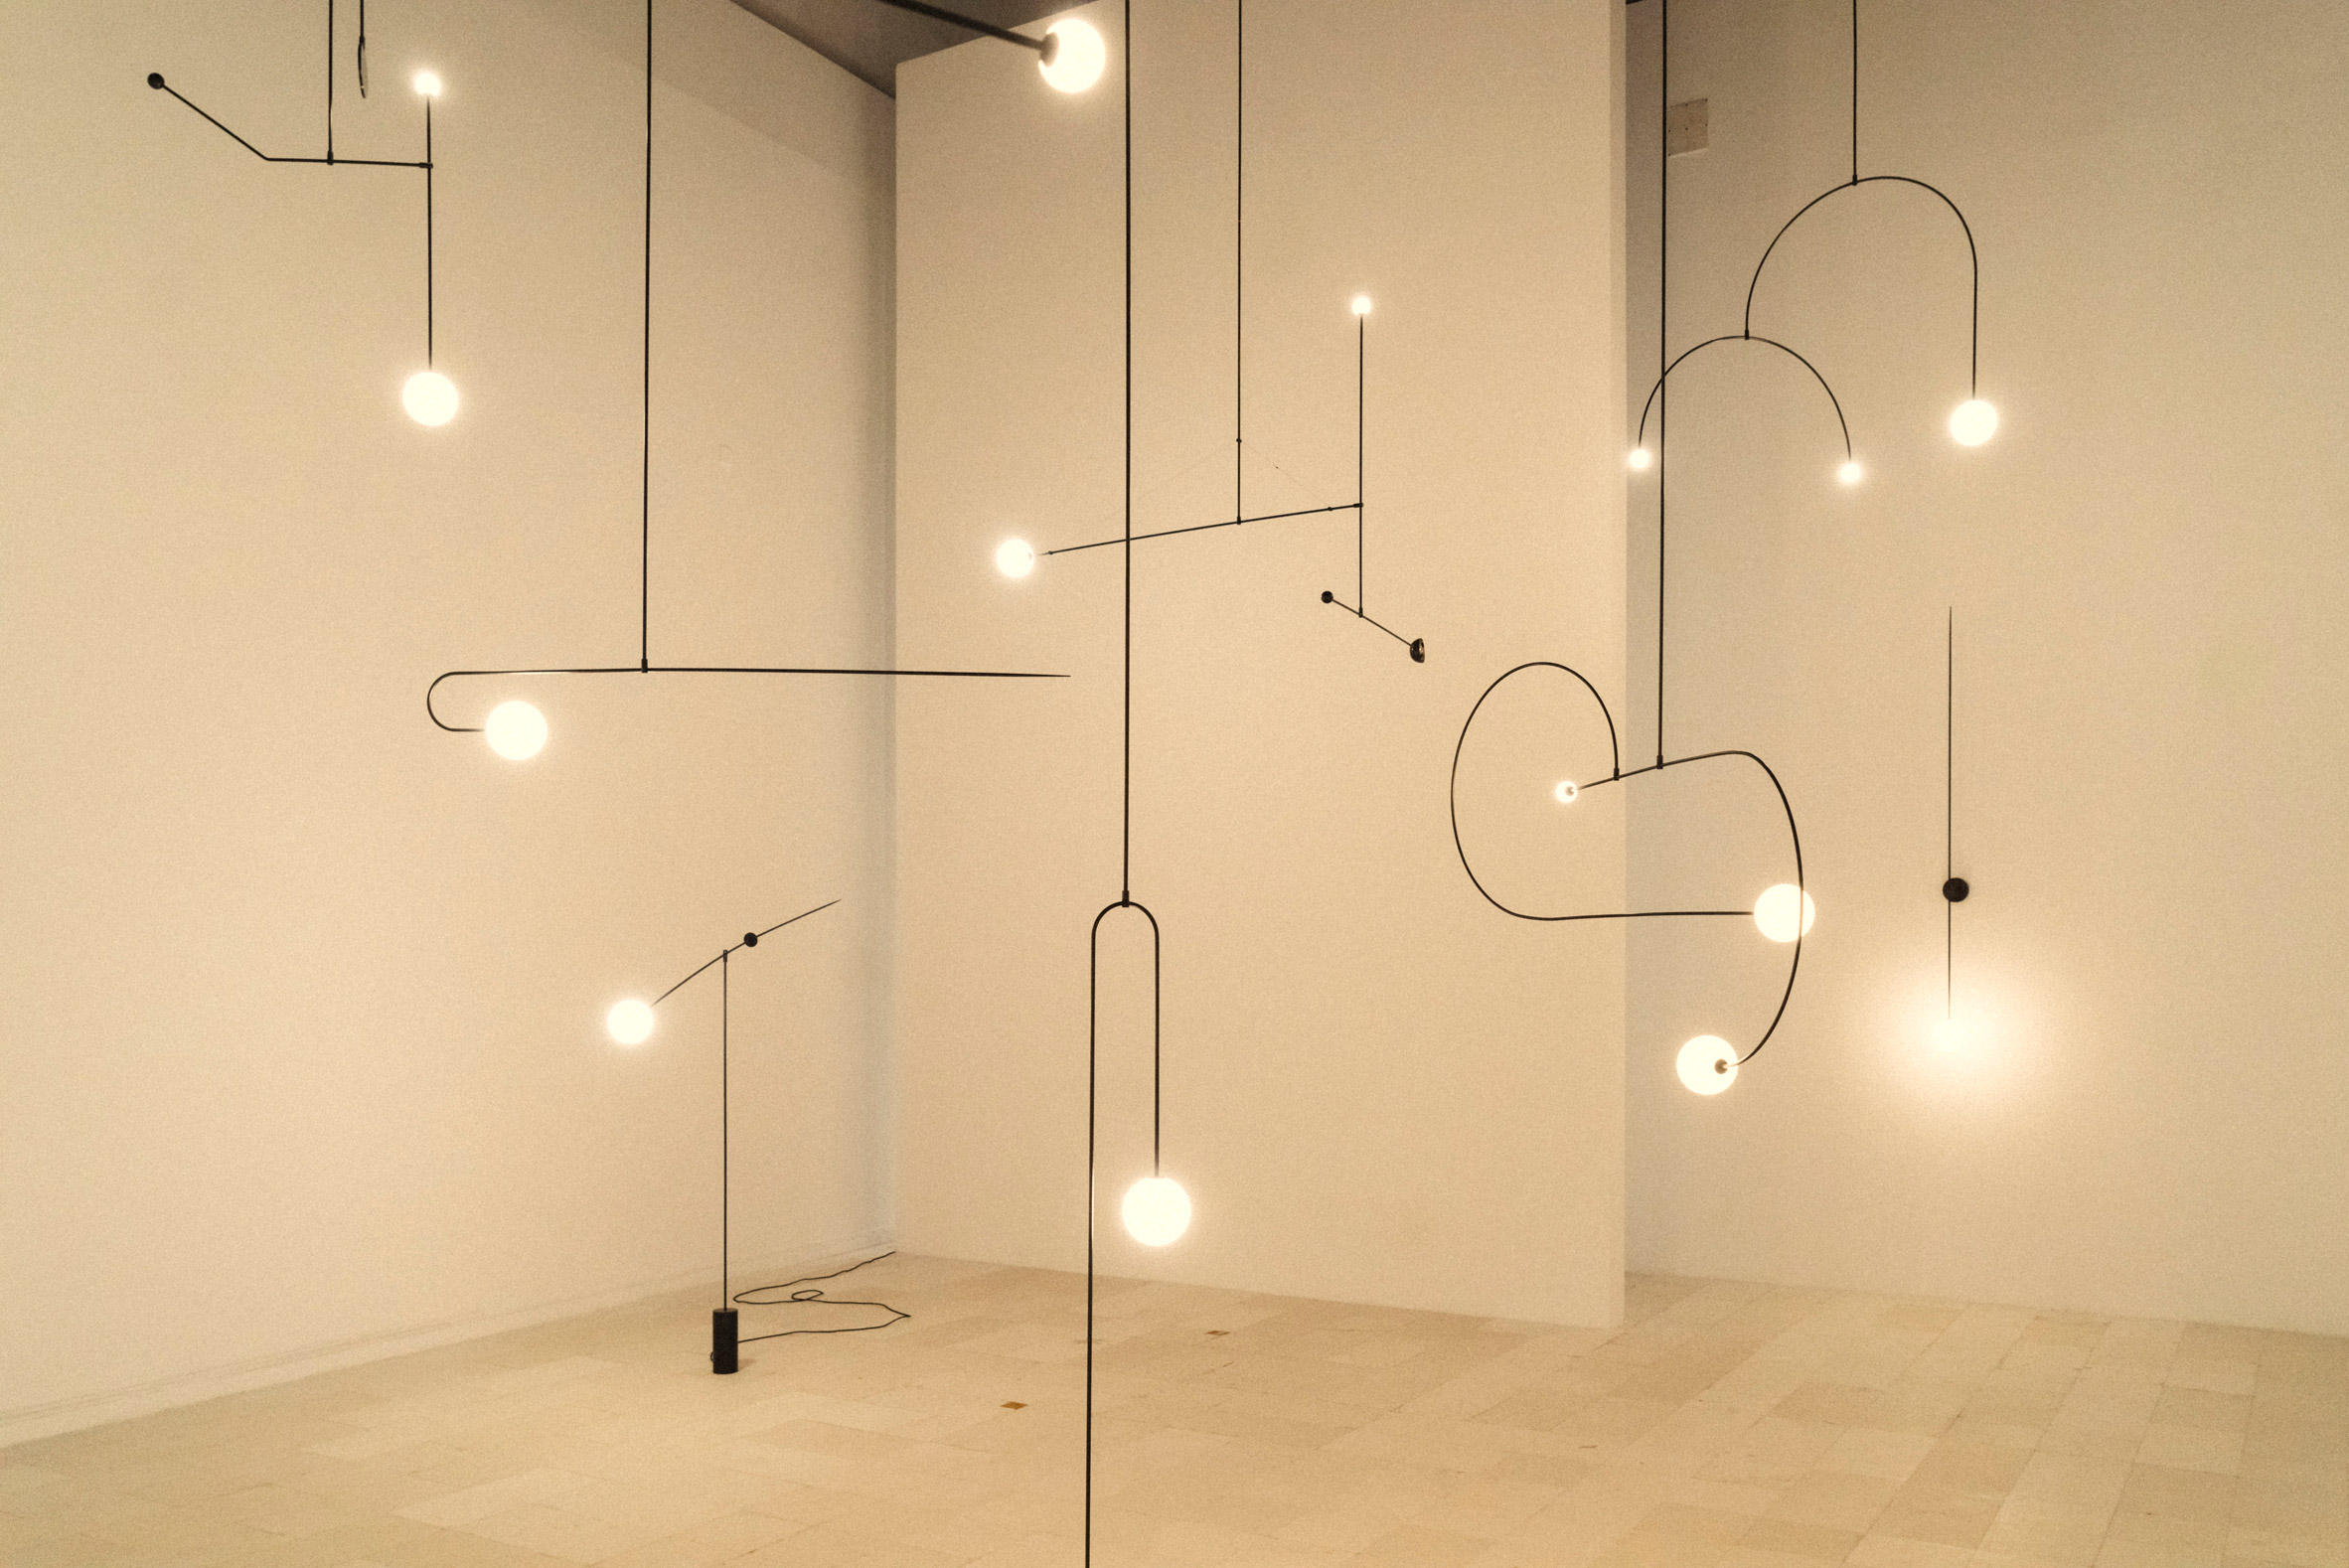 Michael Anastassiades is presenting his Mobile Chandelier series at Maison&Objet 2020